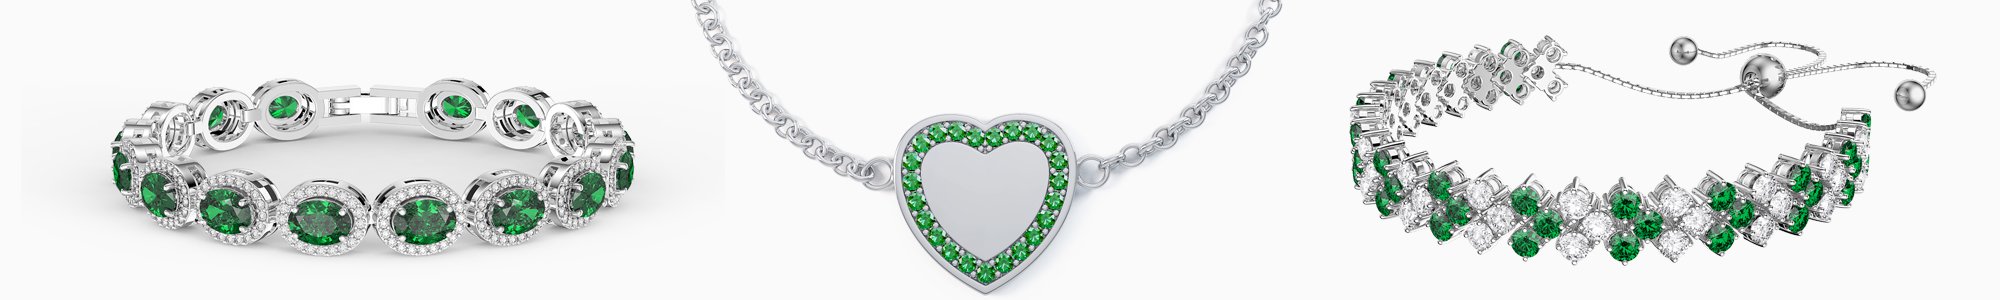 Shop Emerald Bracelets by Jian London. Buy direct and save from our wide selection of Emerald Bracelets at the Jian London jewellery Store. Free UK Delivery